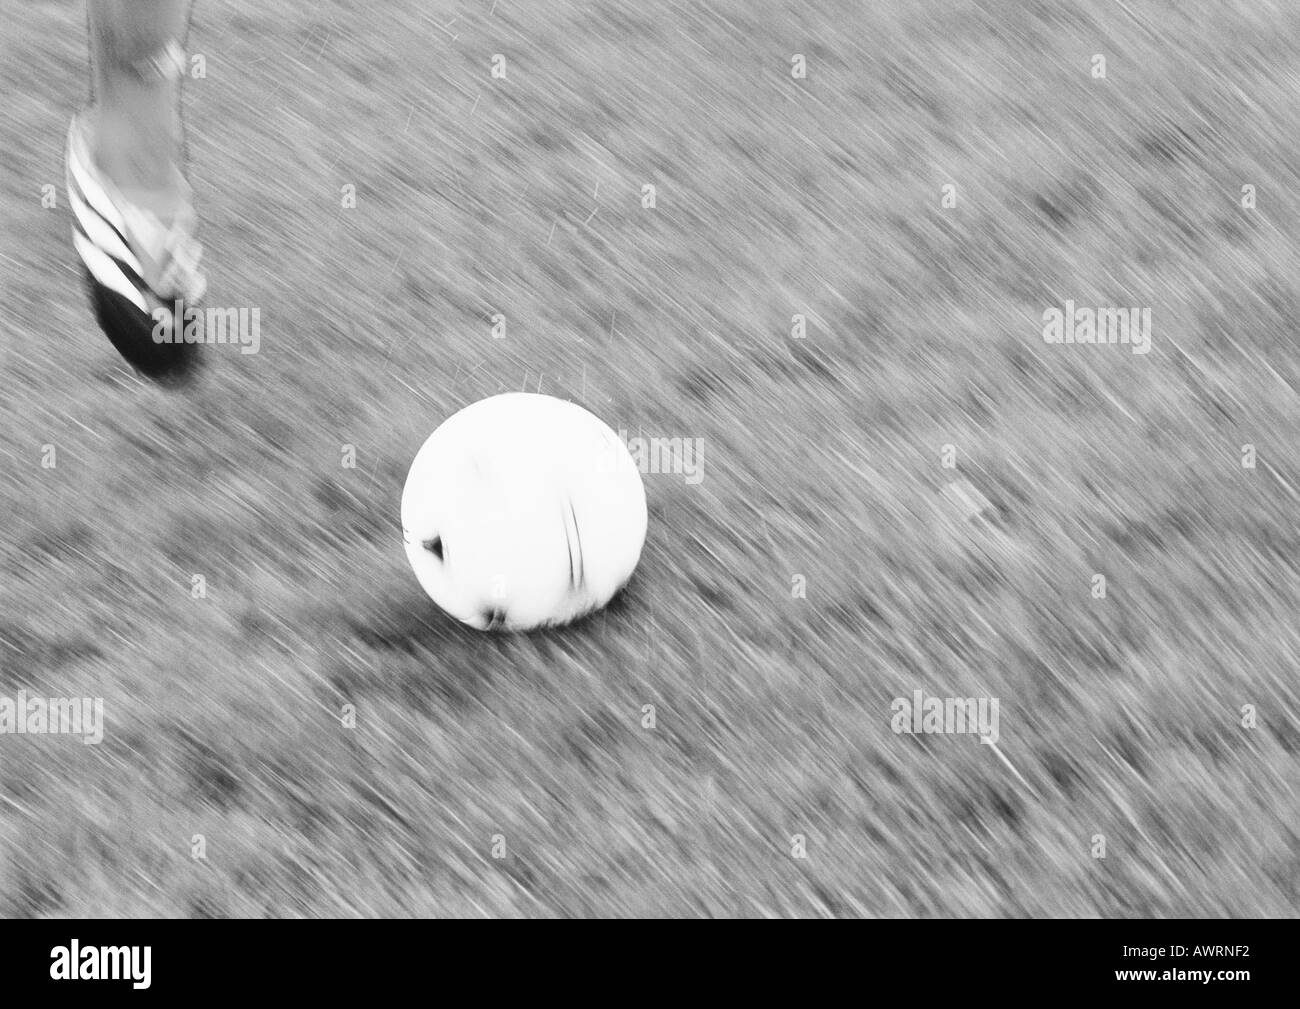 Foot of player and soccer ball, blurred, b&w. Stock Photo